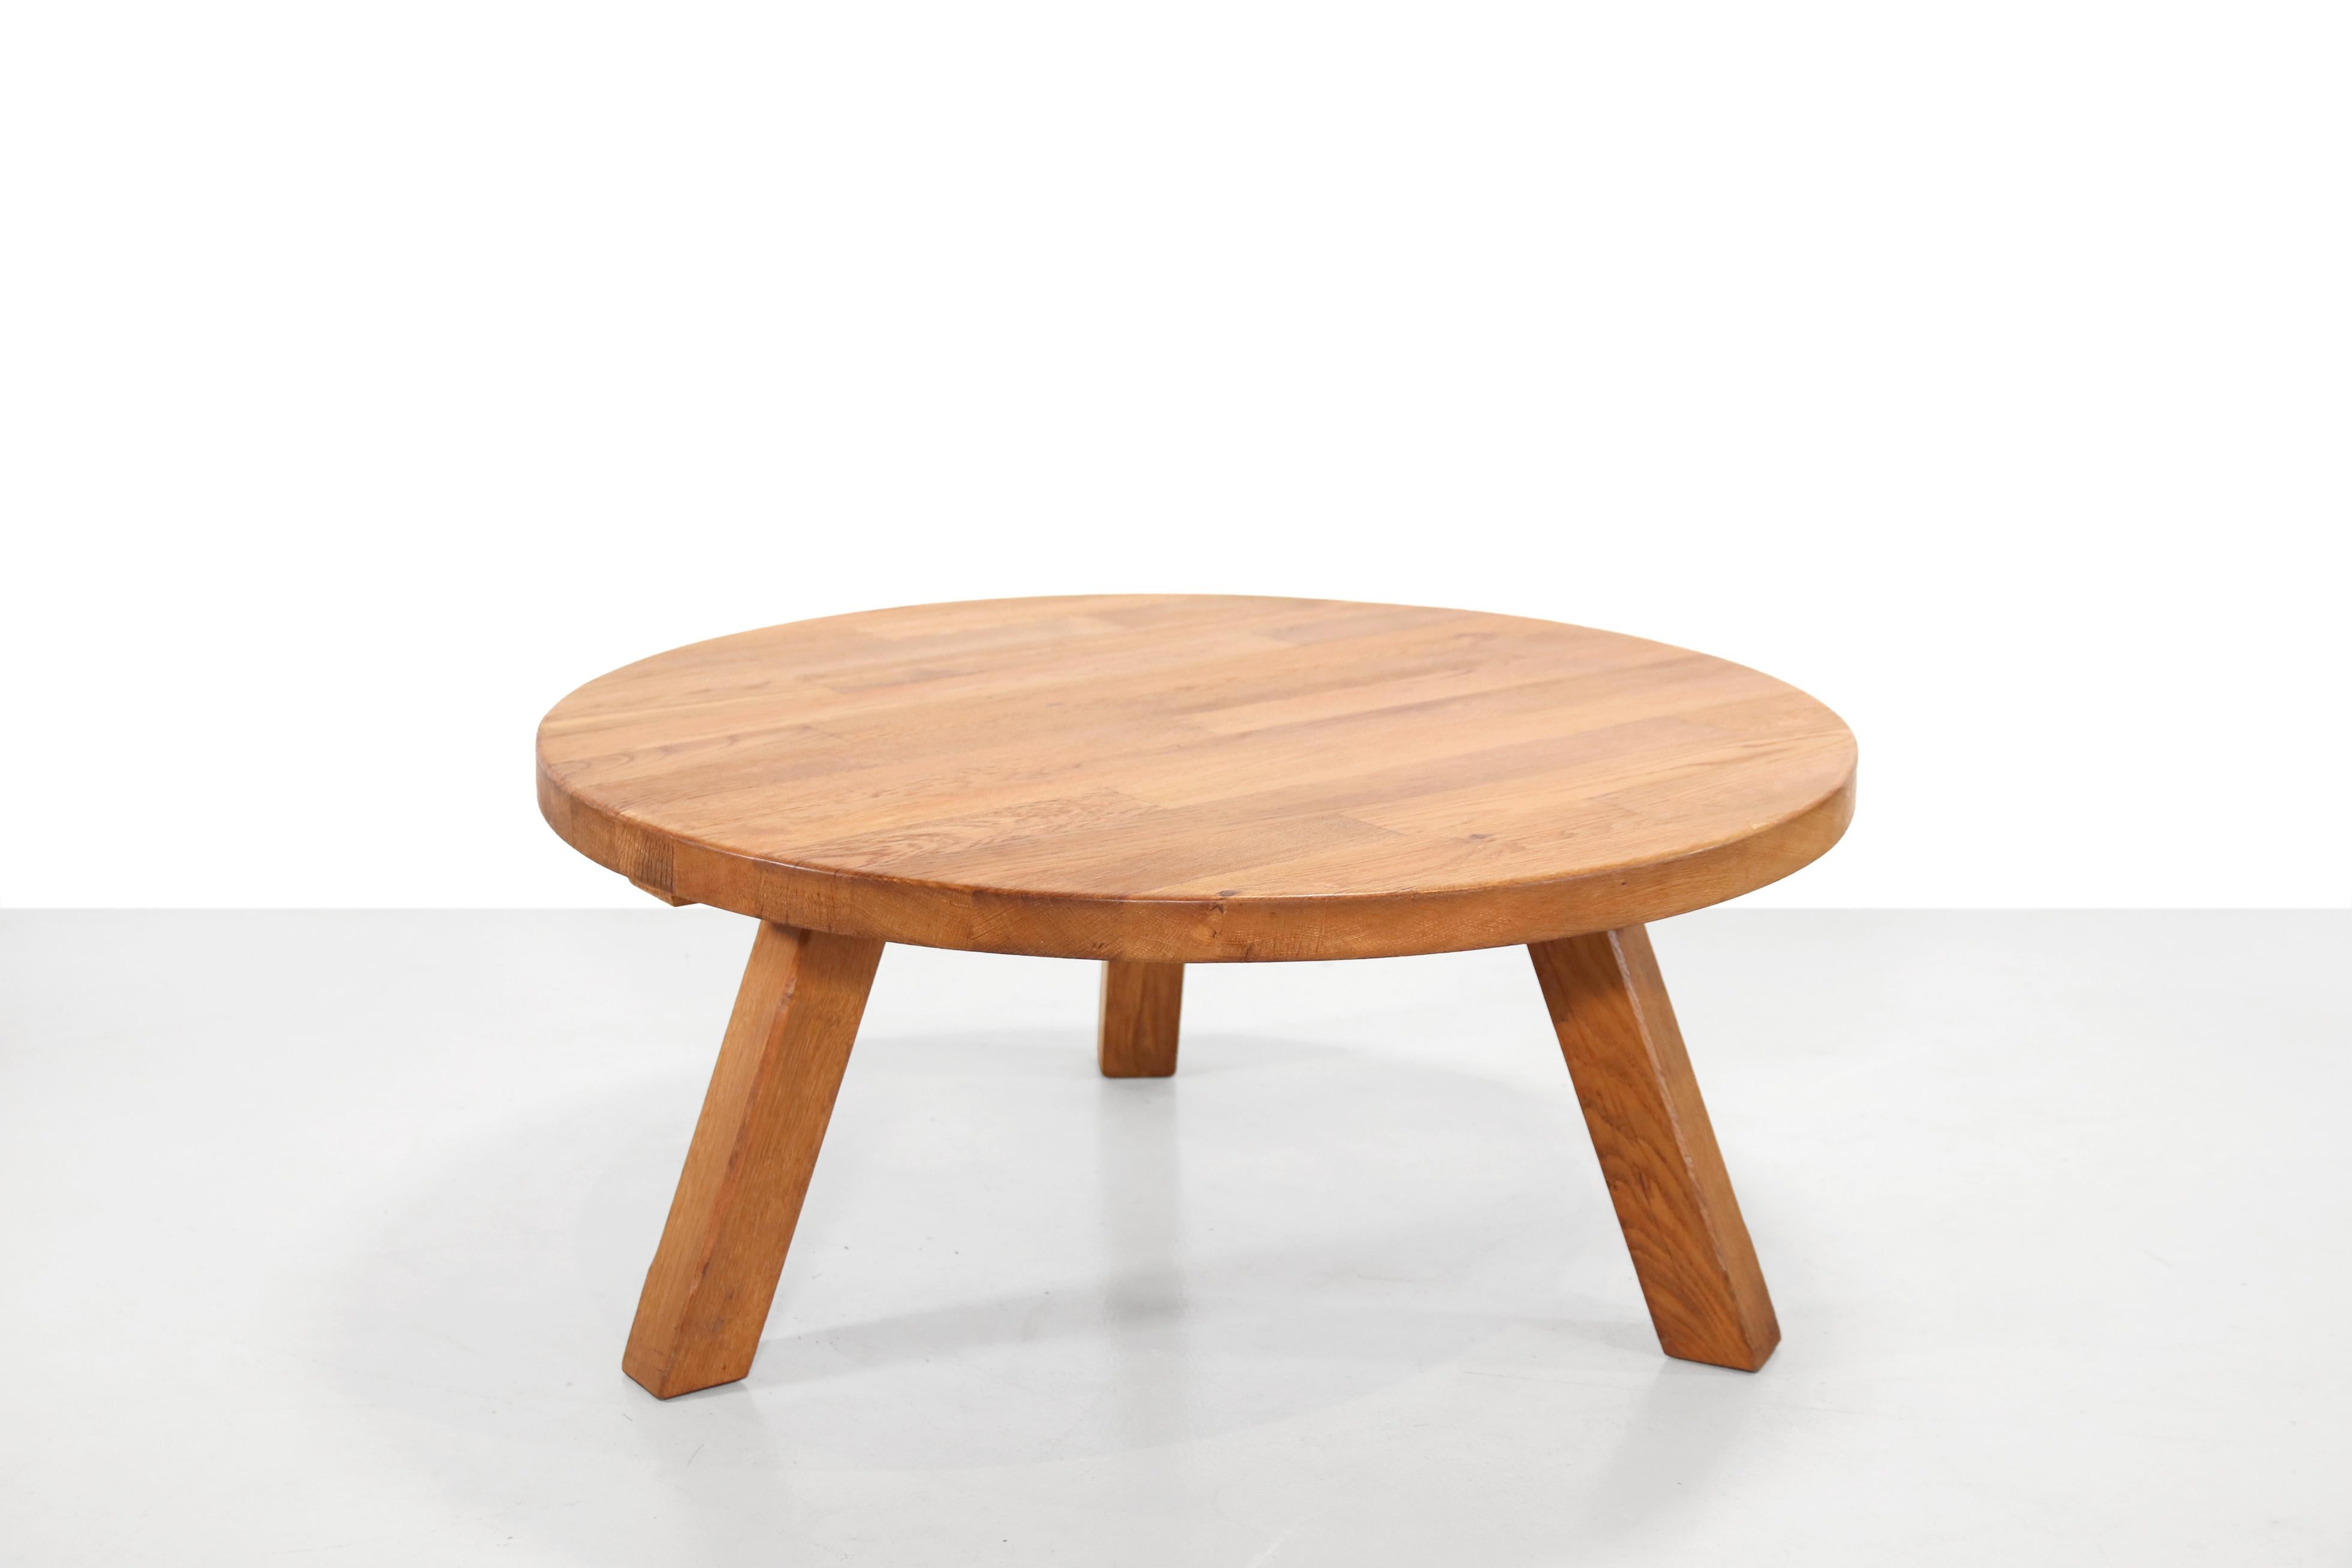 Brutalist round coffee table. Traditionally made from solid oak wood. The table stands on three legs and was made by Meubelfabriek Oisterwijk. This manufacturer is known for high-quality Dutch Craftmanship. The table has a diameter of 100 cm and is